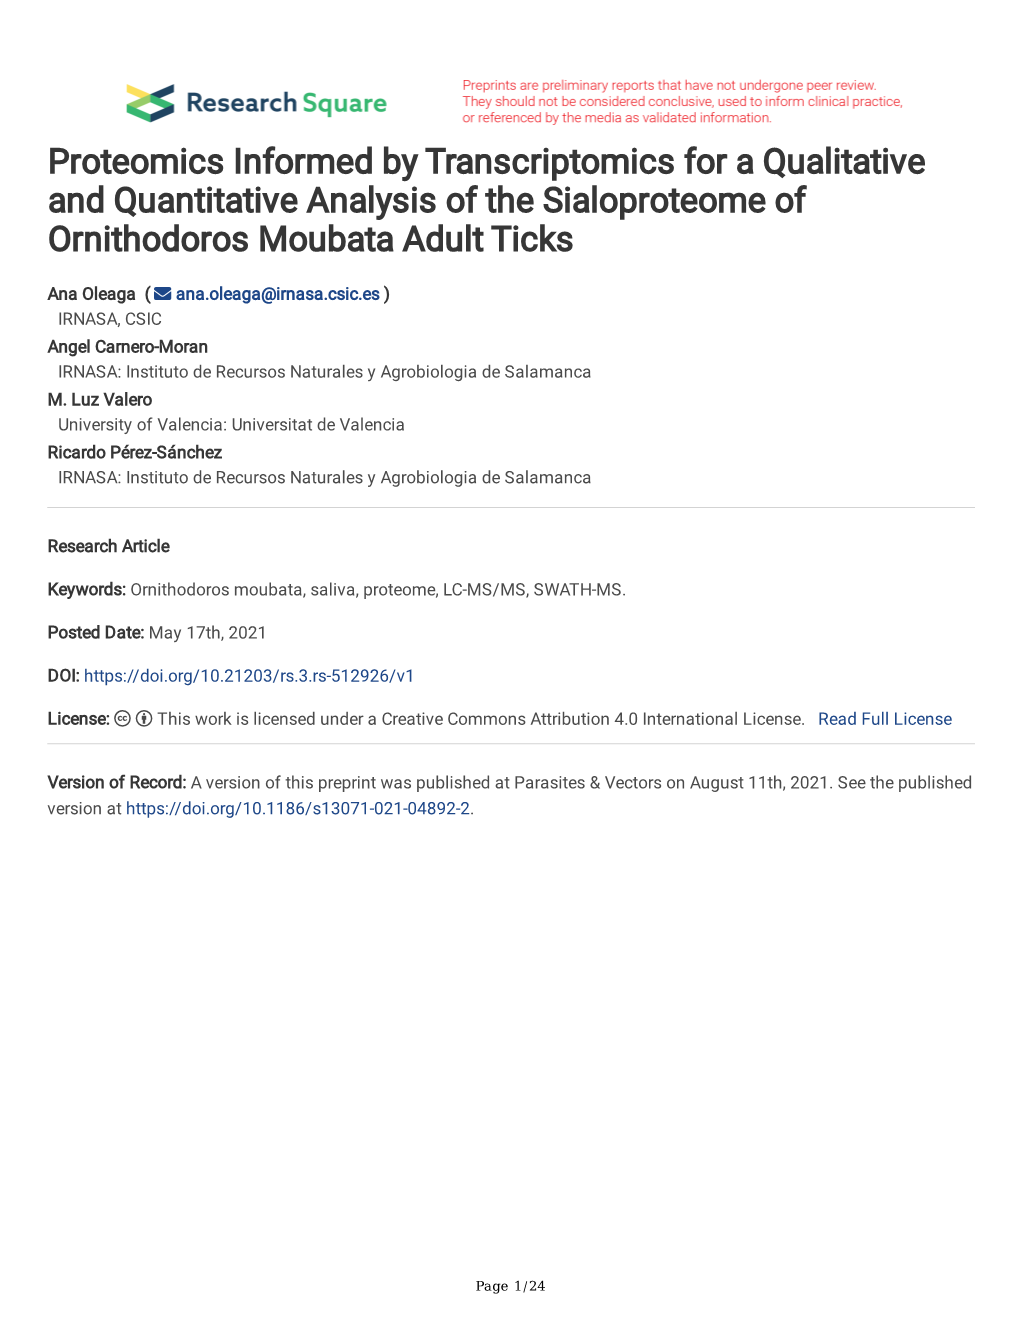 Proteomics Informed by Transcriptomics for a Qualitative and Quantitative Analysis of the Sialoproteome of Ornithodoros Moubata Adult Ticks